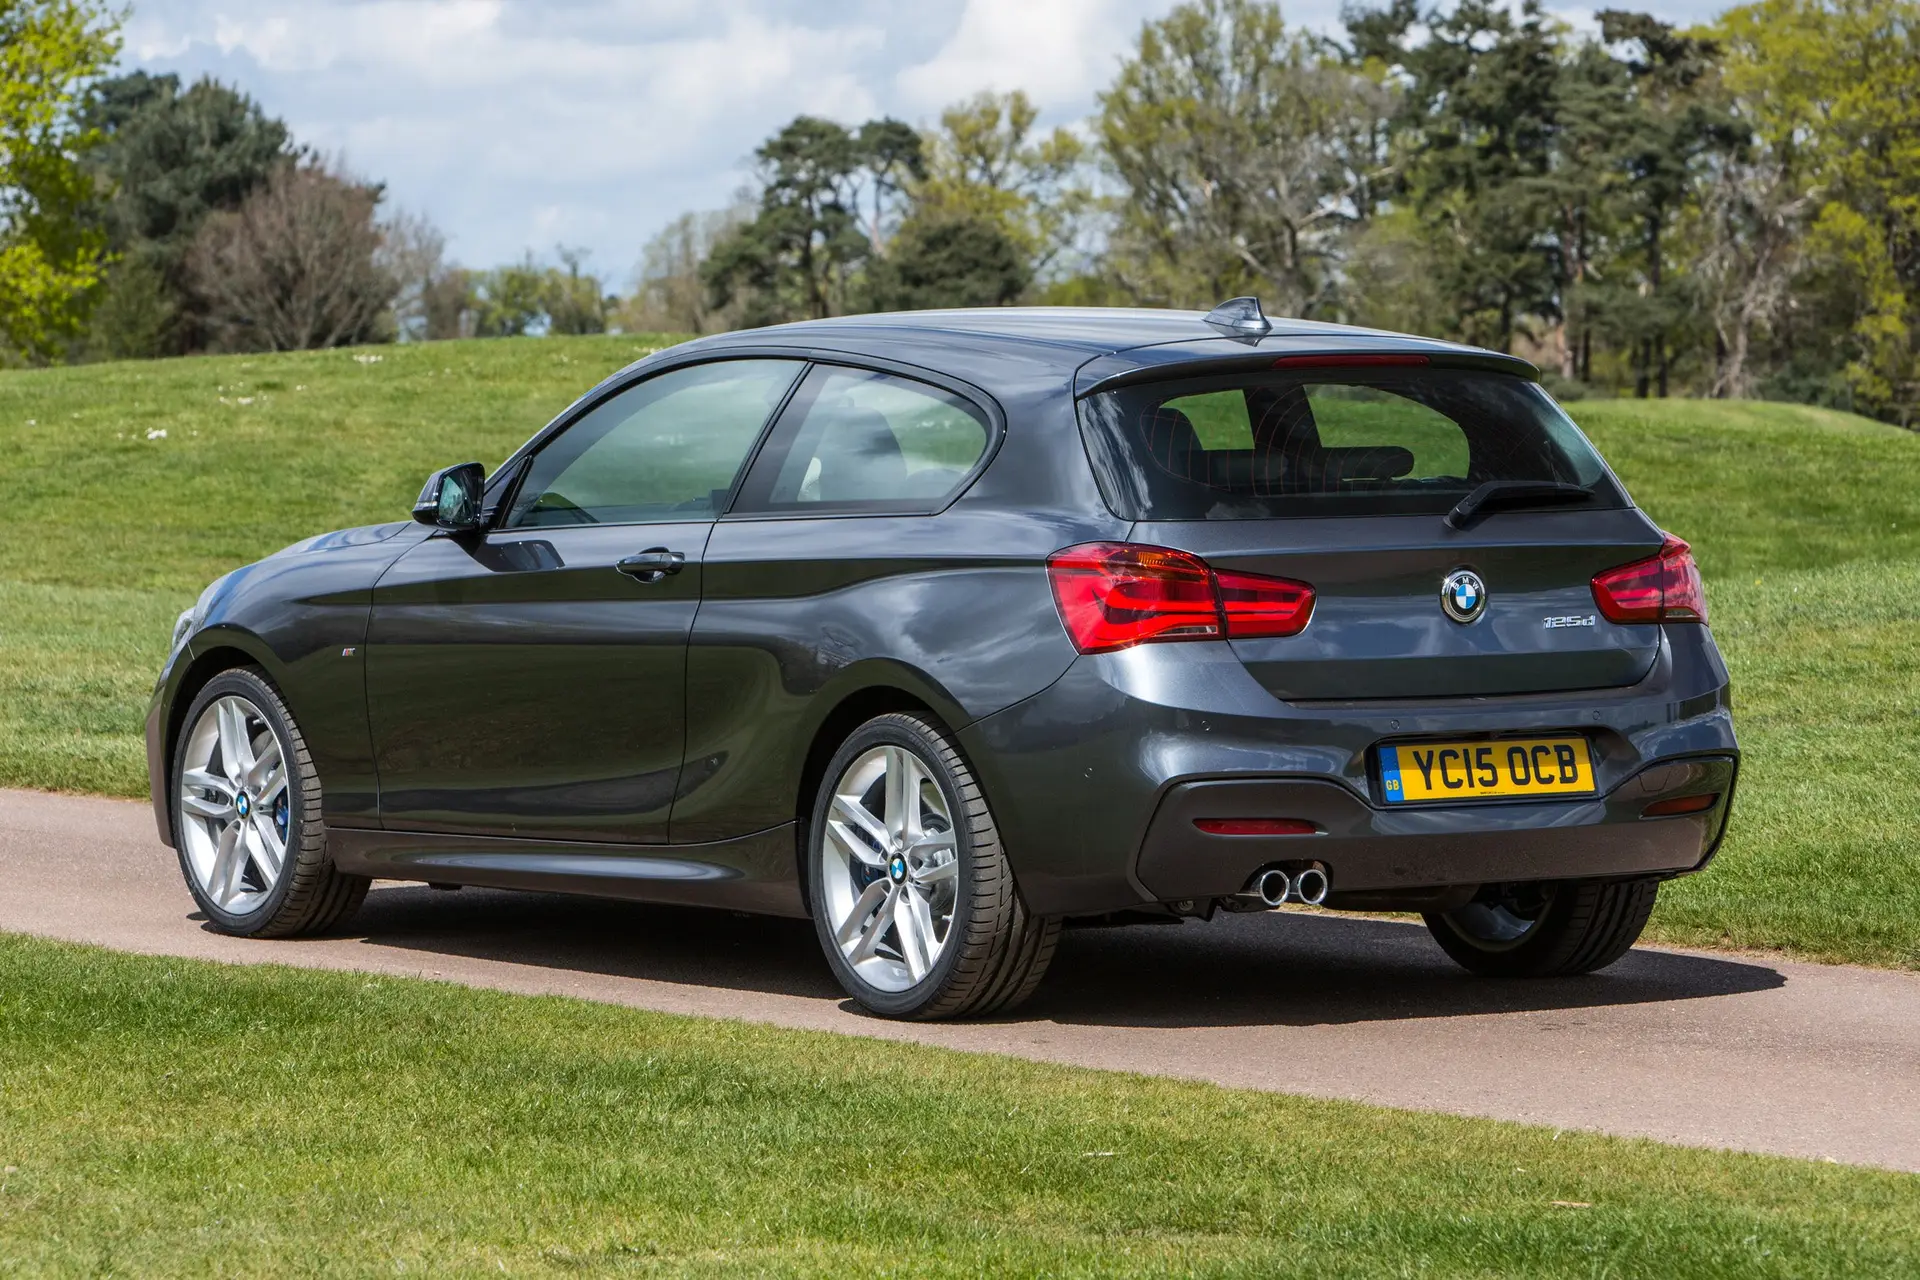 BMW 1 Series (2011-2019) Review: exterior rear three quarter photo of the BMW 1 Series 